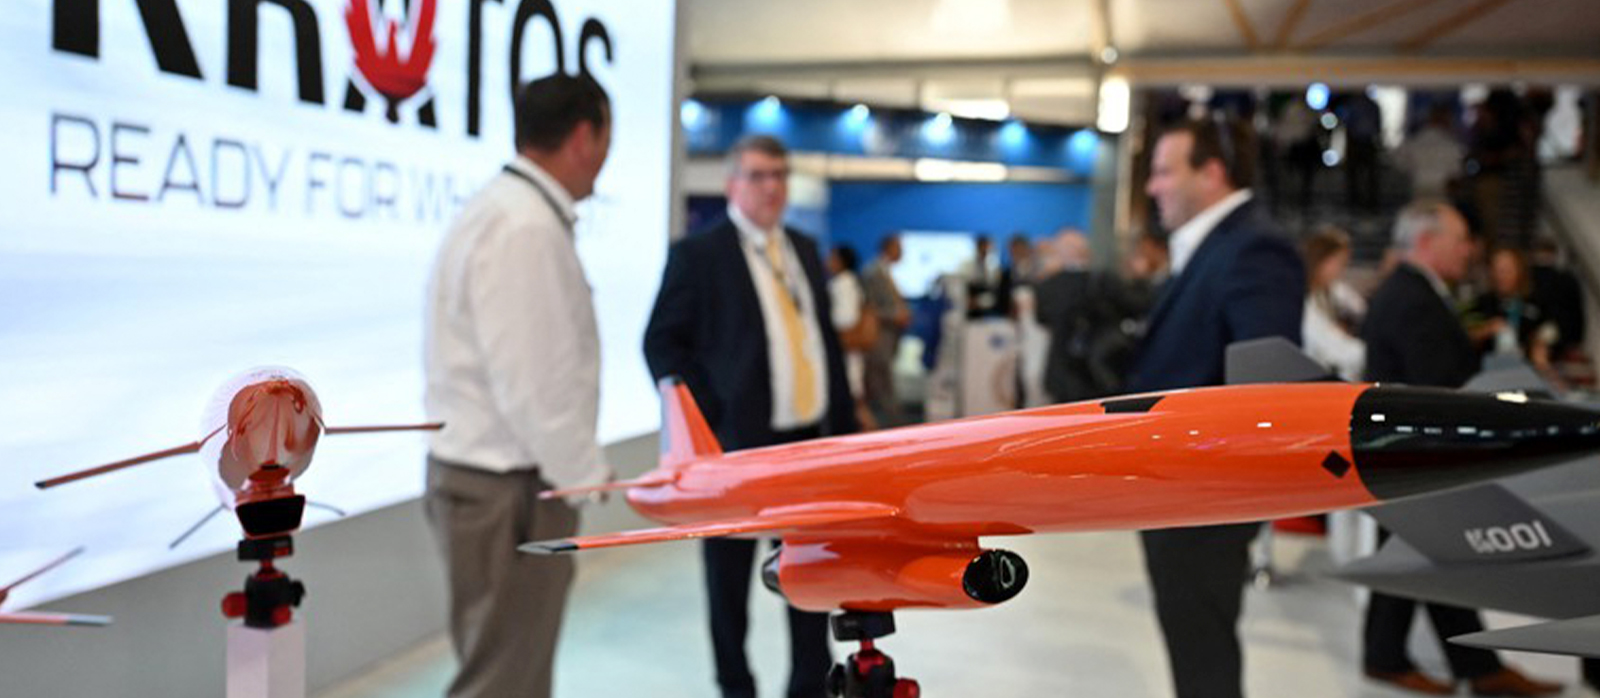 At UK Airshow, Defense Execs Warn of Inflation, Supply Chains, and Worker Shortages